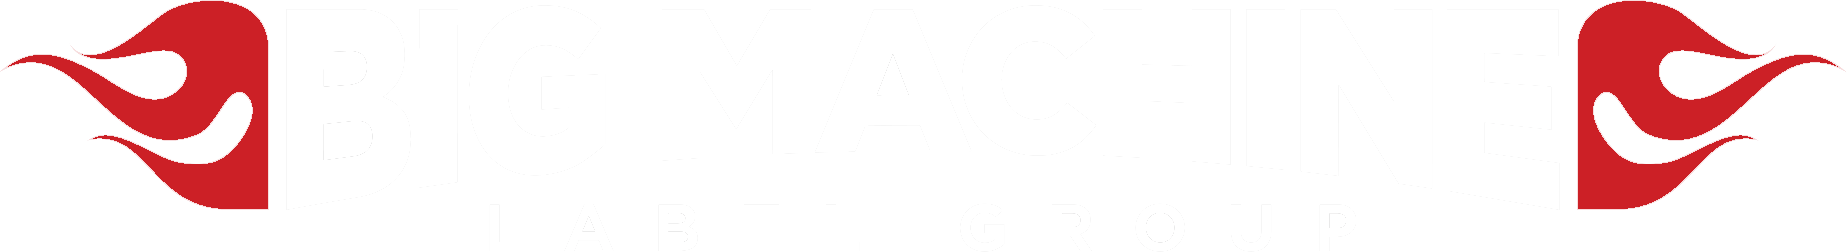 Big Machine Label Group Official Store logo